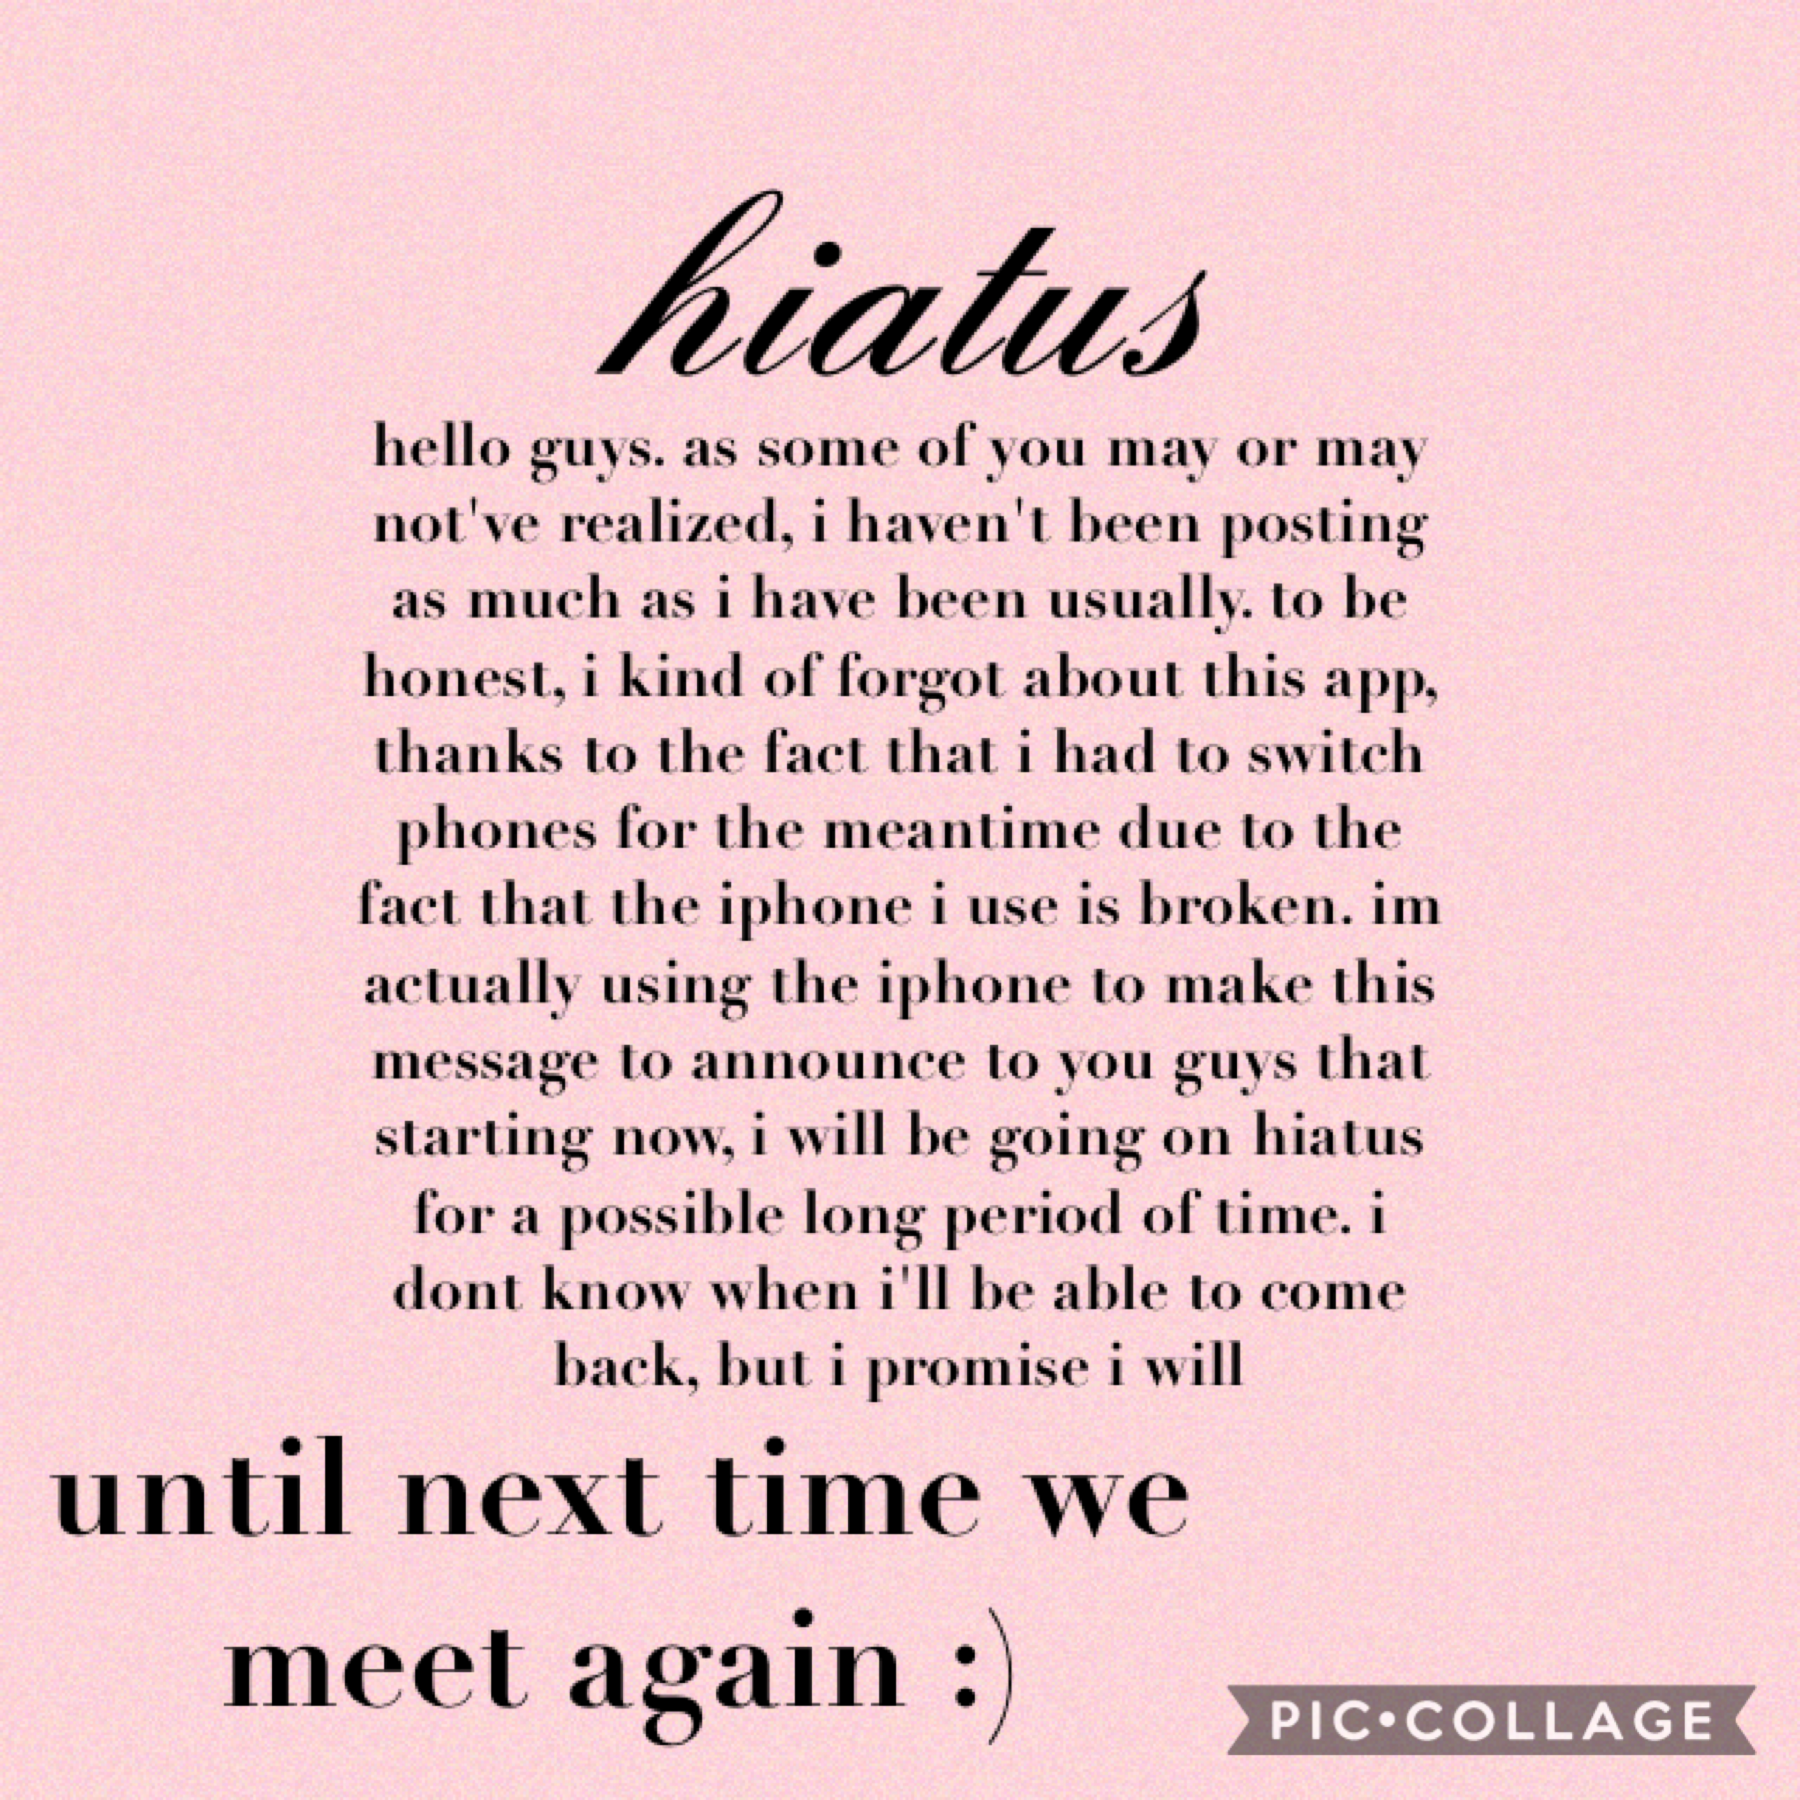 important!!! and yes, i will be going on hiatus. i dont know how long it will take, but maybe a few months to a year at max :(